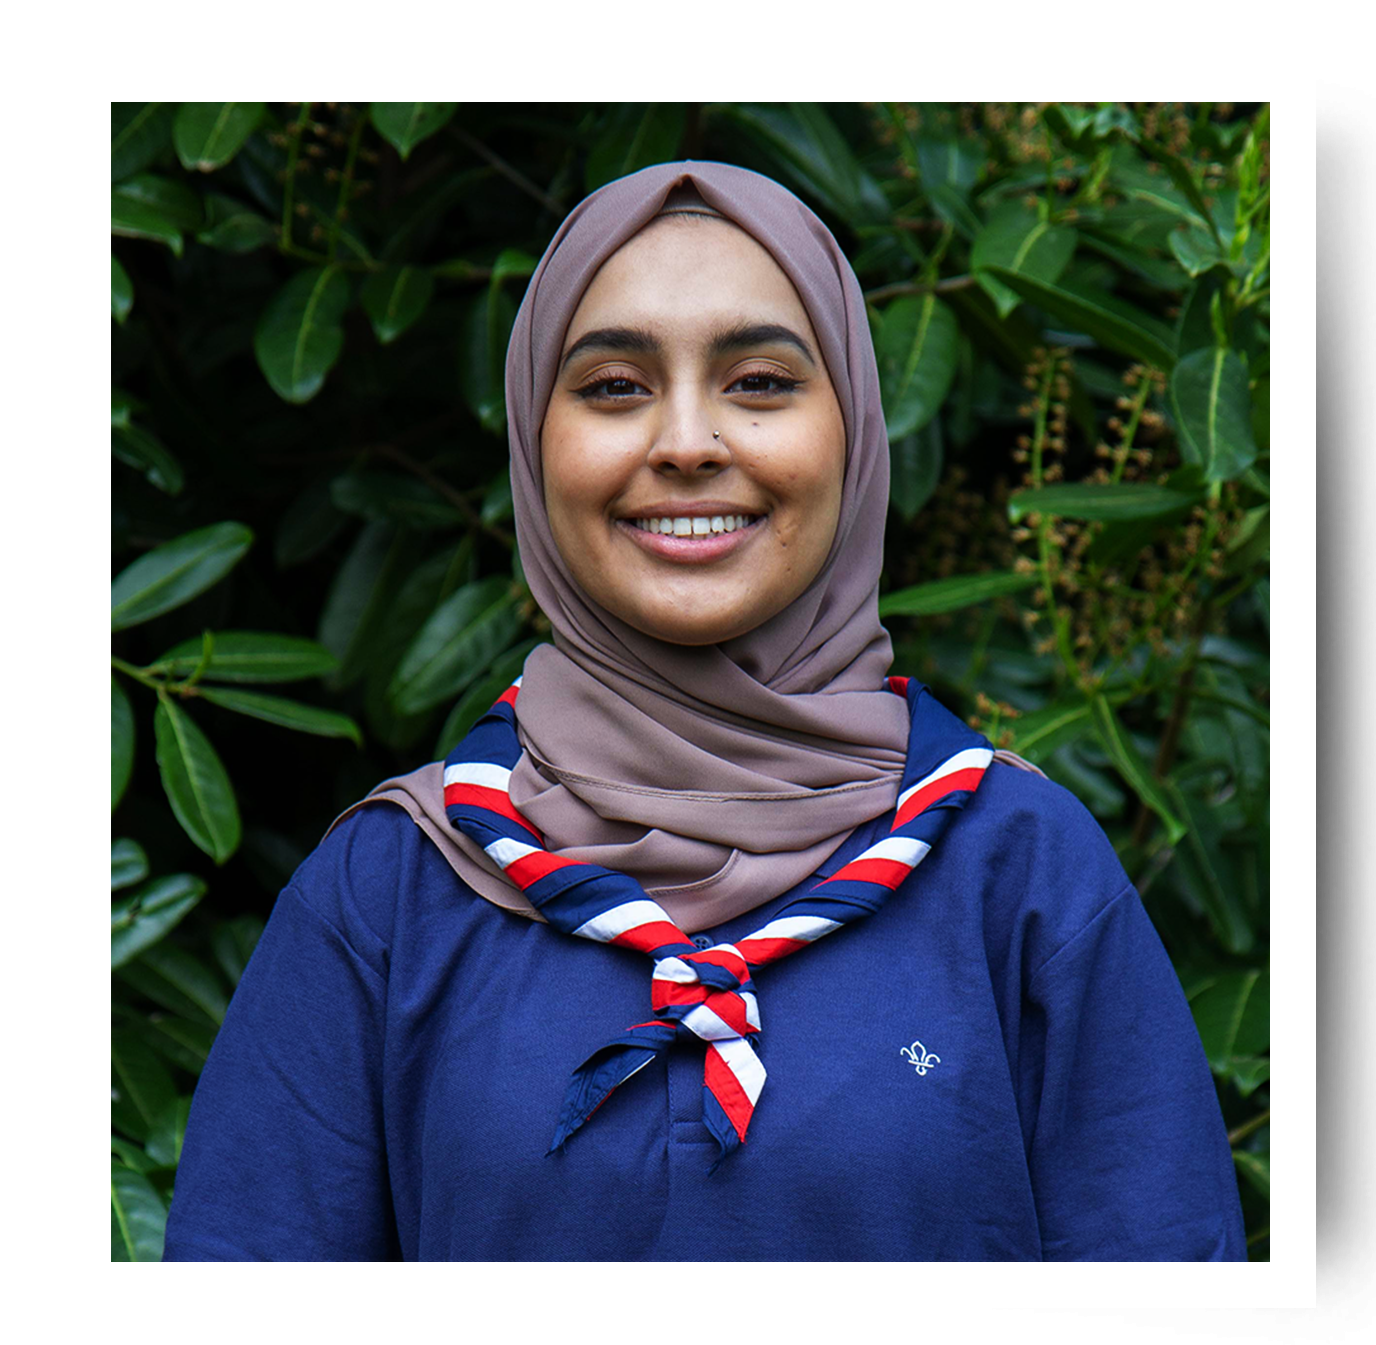 UK Youth Commissioner Ayesha Karim is wearing Scouts uniform and a necker, and is smiling outside in front of a hedge